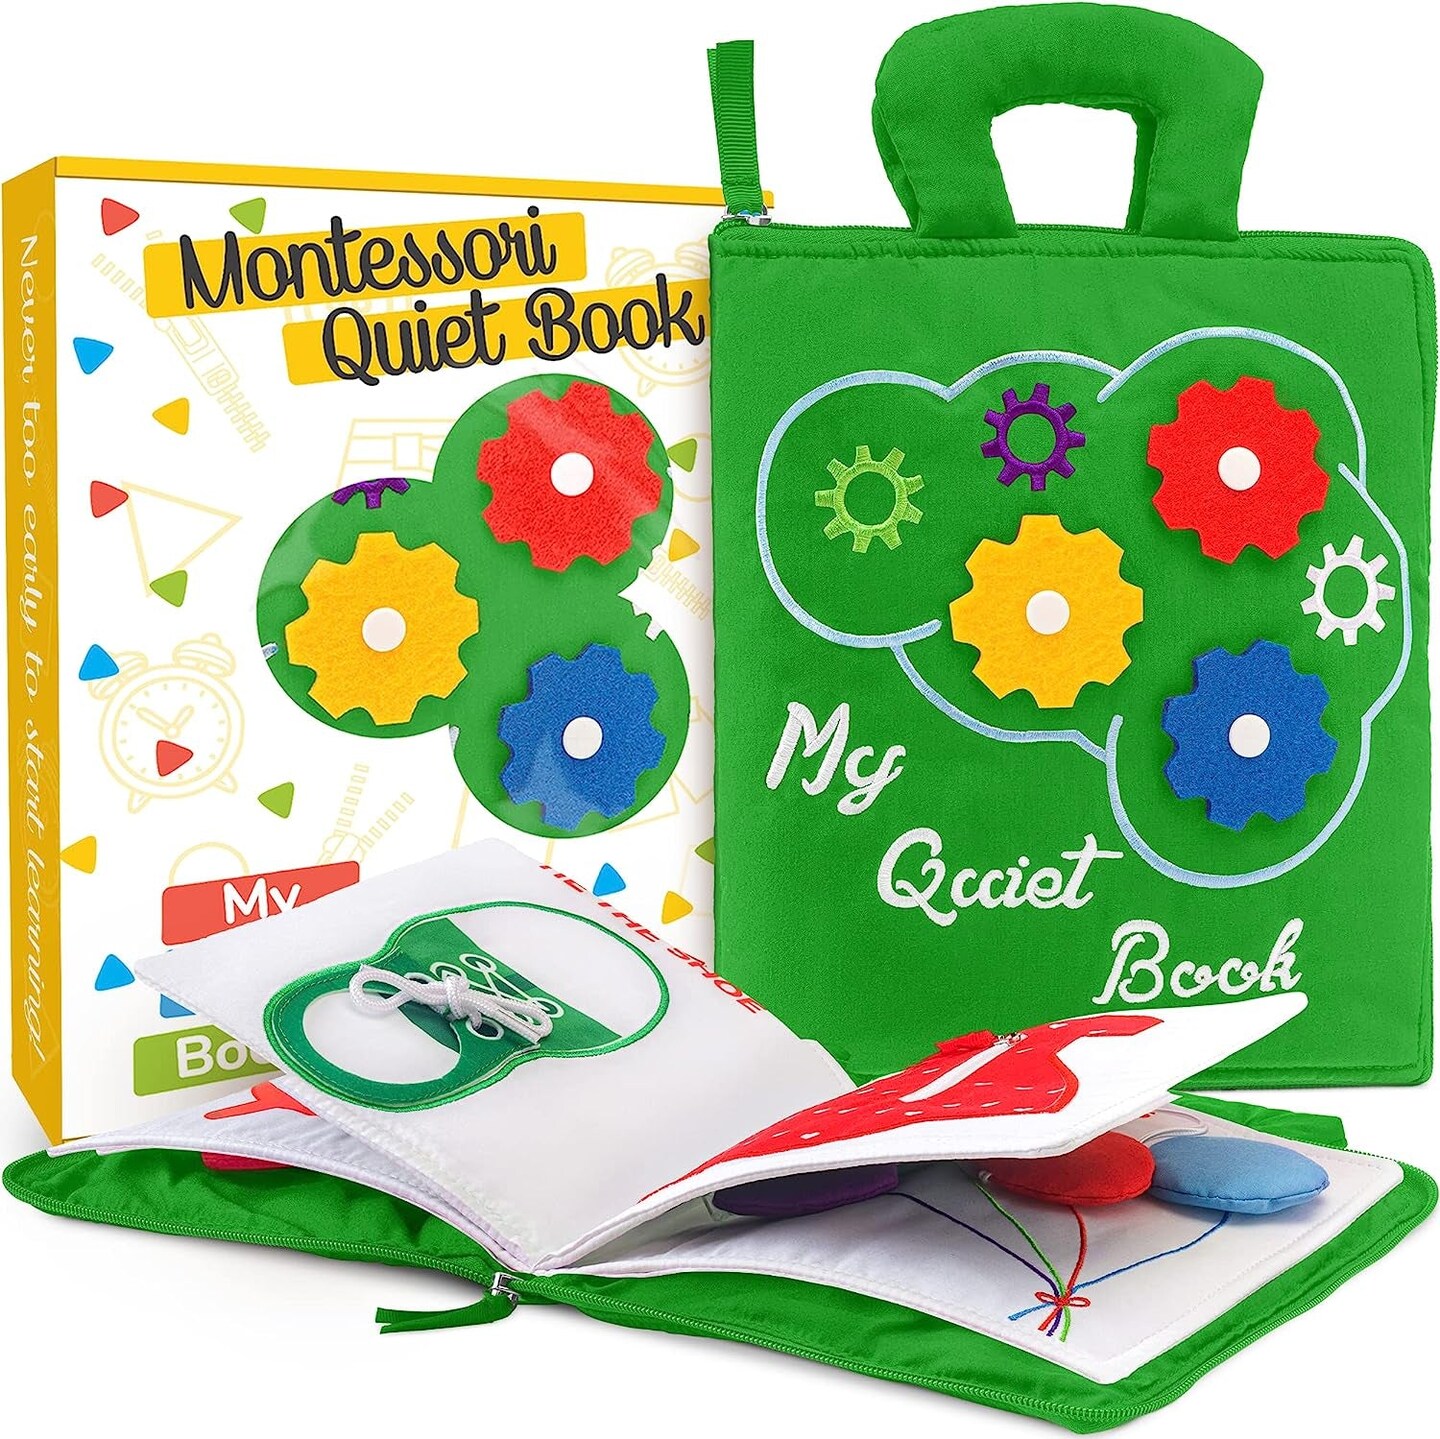 deMoca Quiet Book Montessori Toys for 1 2 3 Year Old, Preschool Busy Book  for Toddlers 1-3, Travel Road Trip Essentials Kids wit